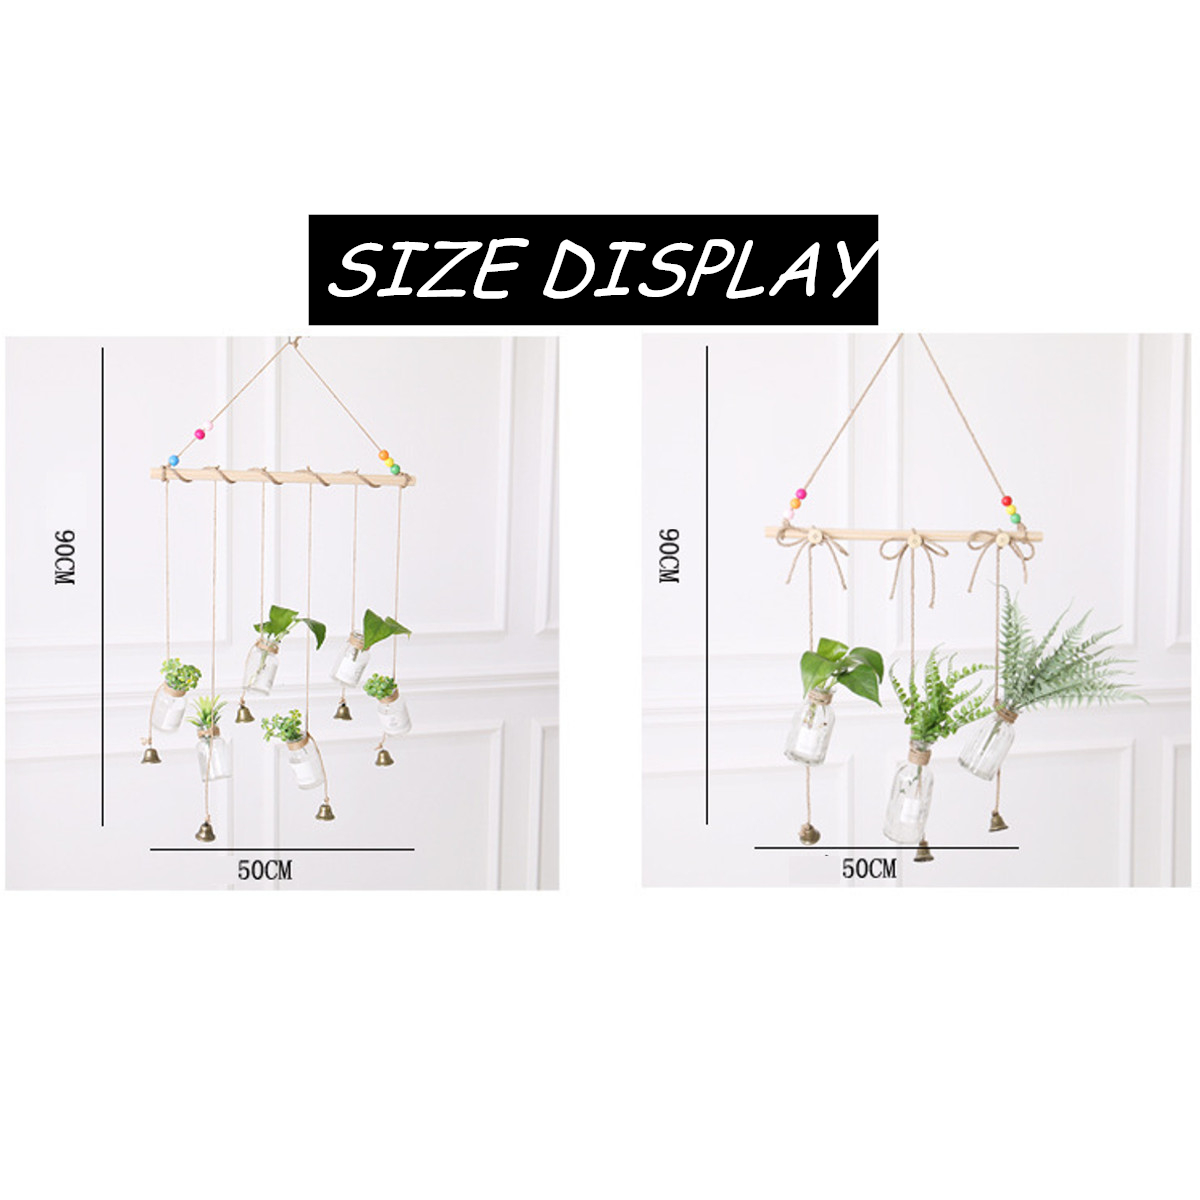 Hanging-Clear-Glass-Flower-Plant-Hydroponic-System-Vase-Terrarium-Container-Home-Garden-1438290-1